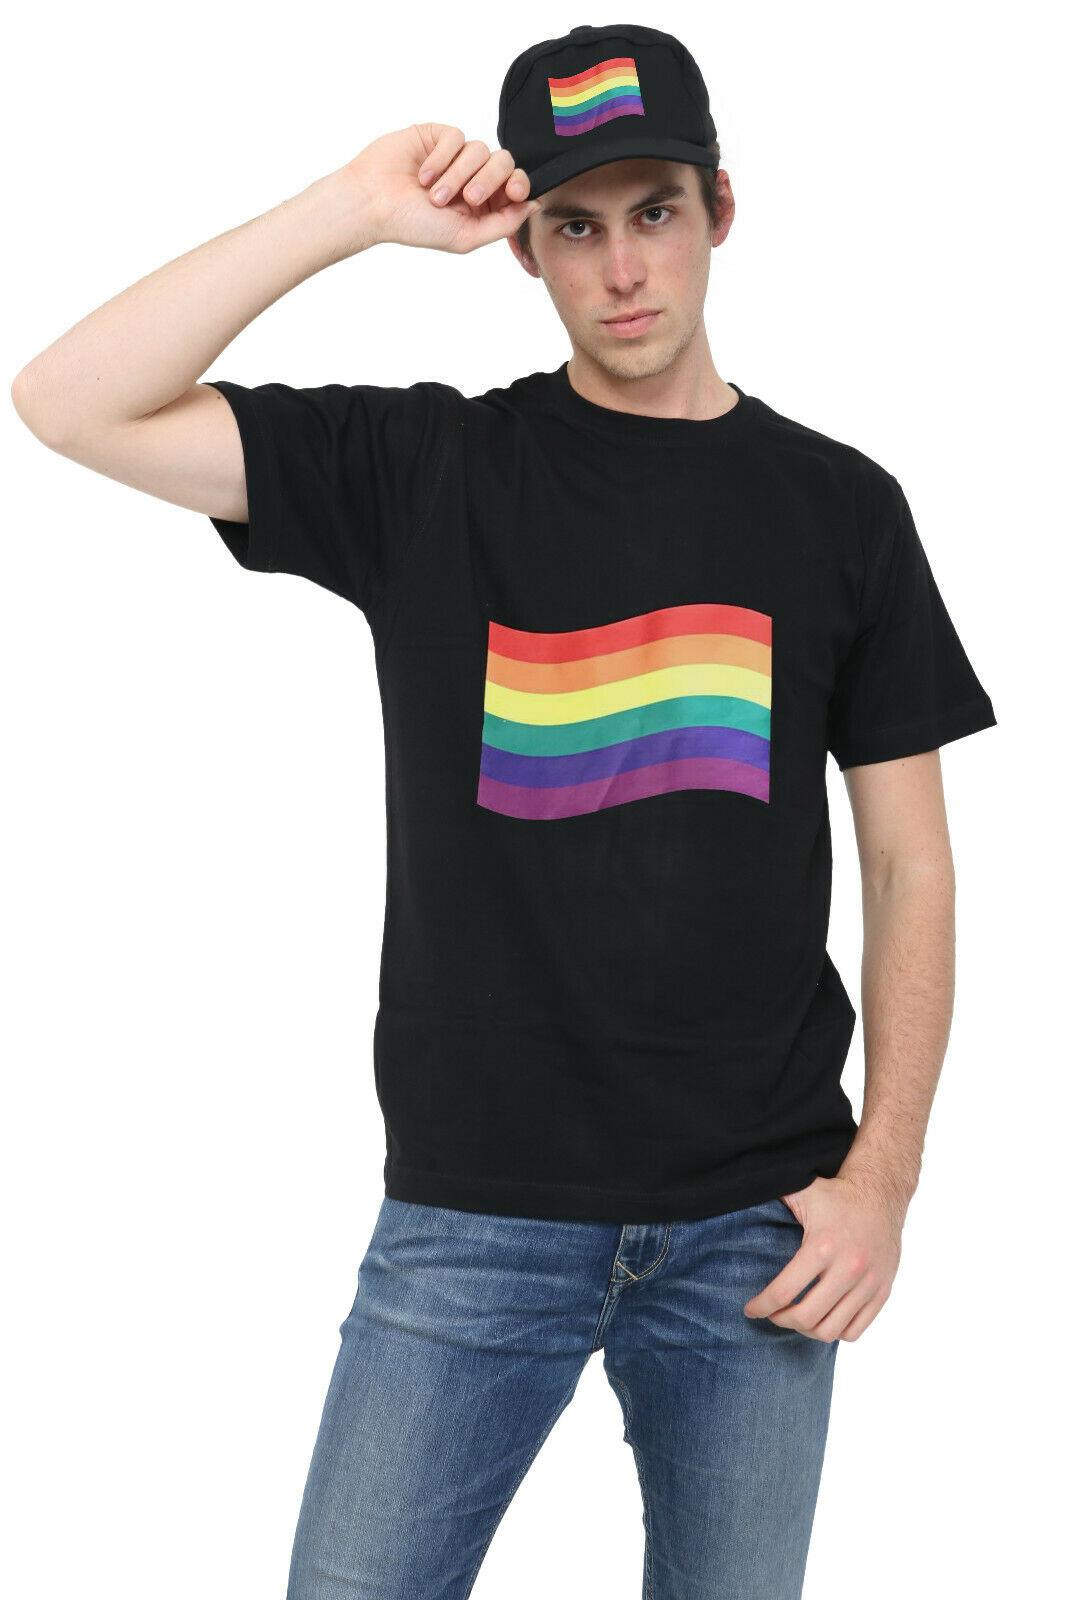 Adults Gay Pride Flag Printed T-Shirt with Cap Lesbian LGBT Festival Party Set - Labreeze